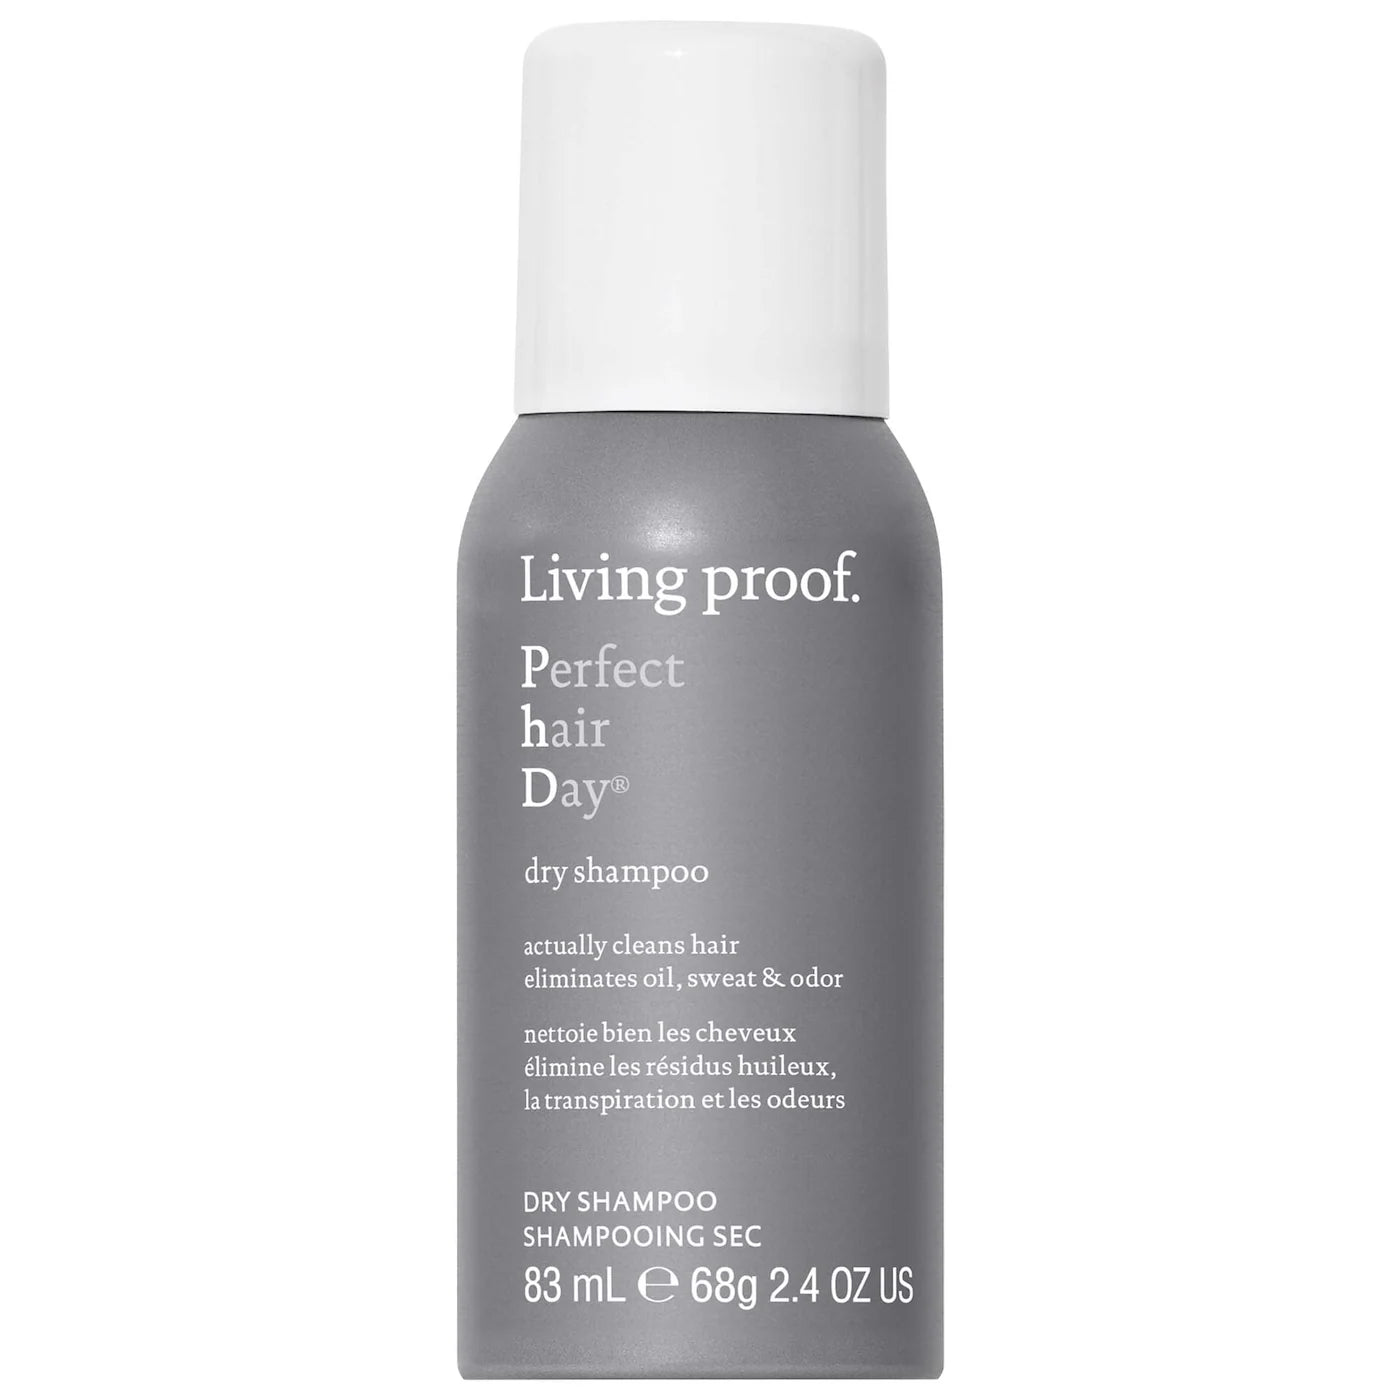 Living Proof Perfect Hair Day (PhD) Dry ShampooHair ShampooLIVING PROOFSize: 2.4 oz